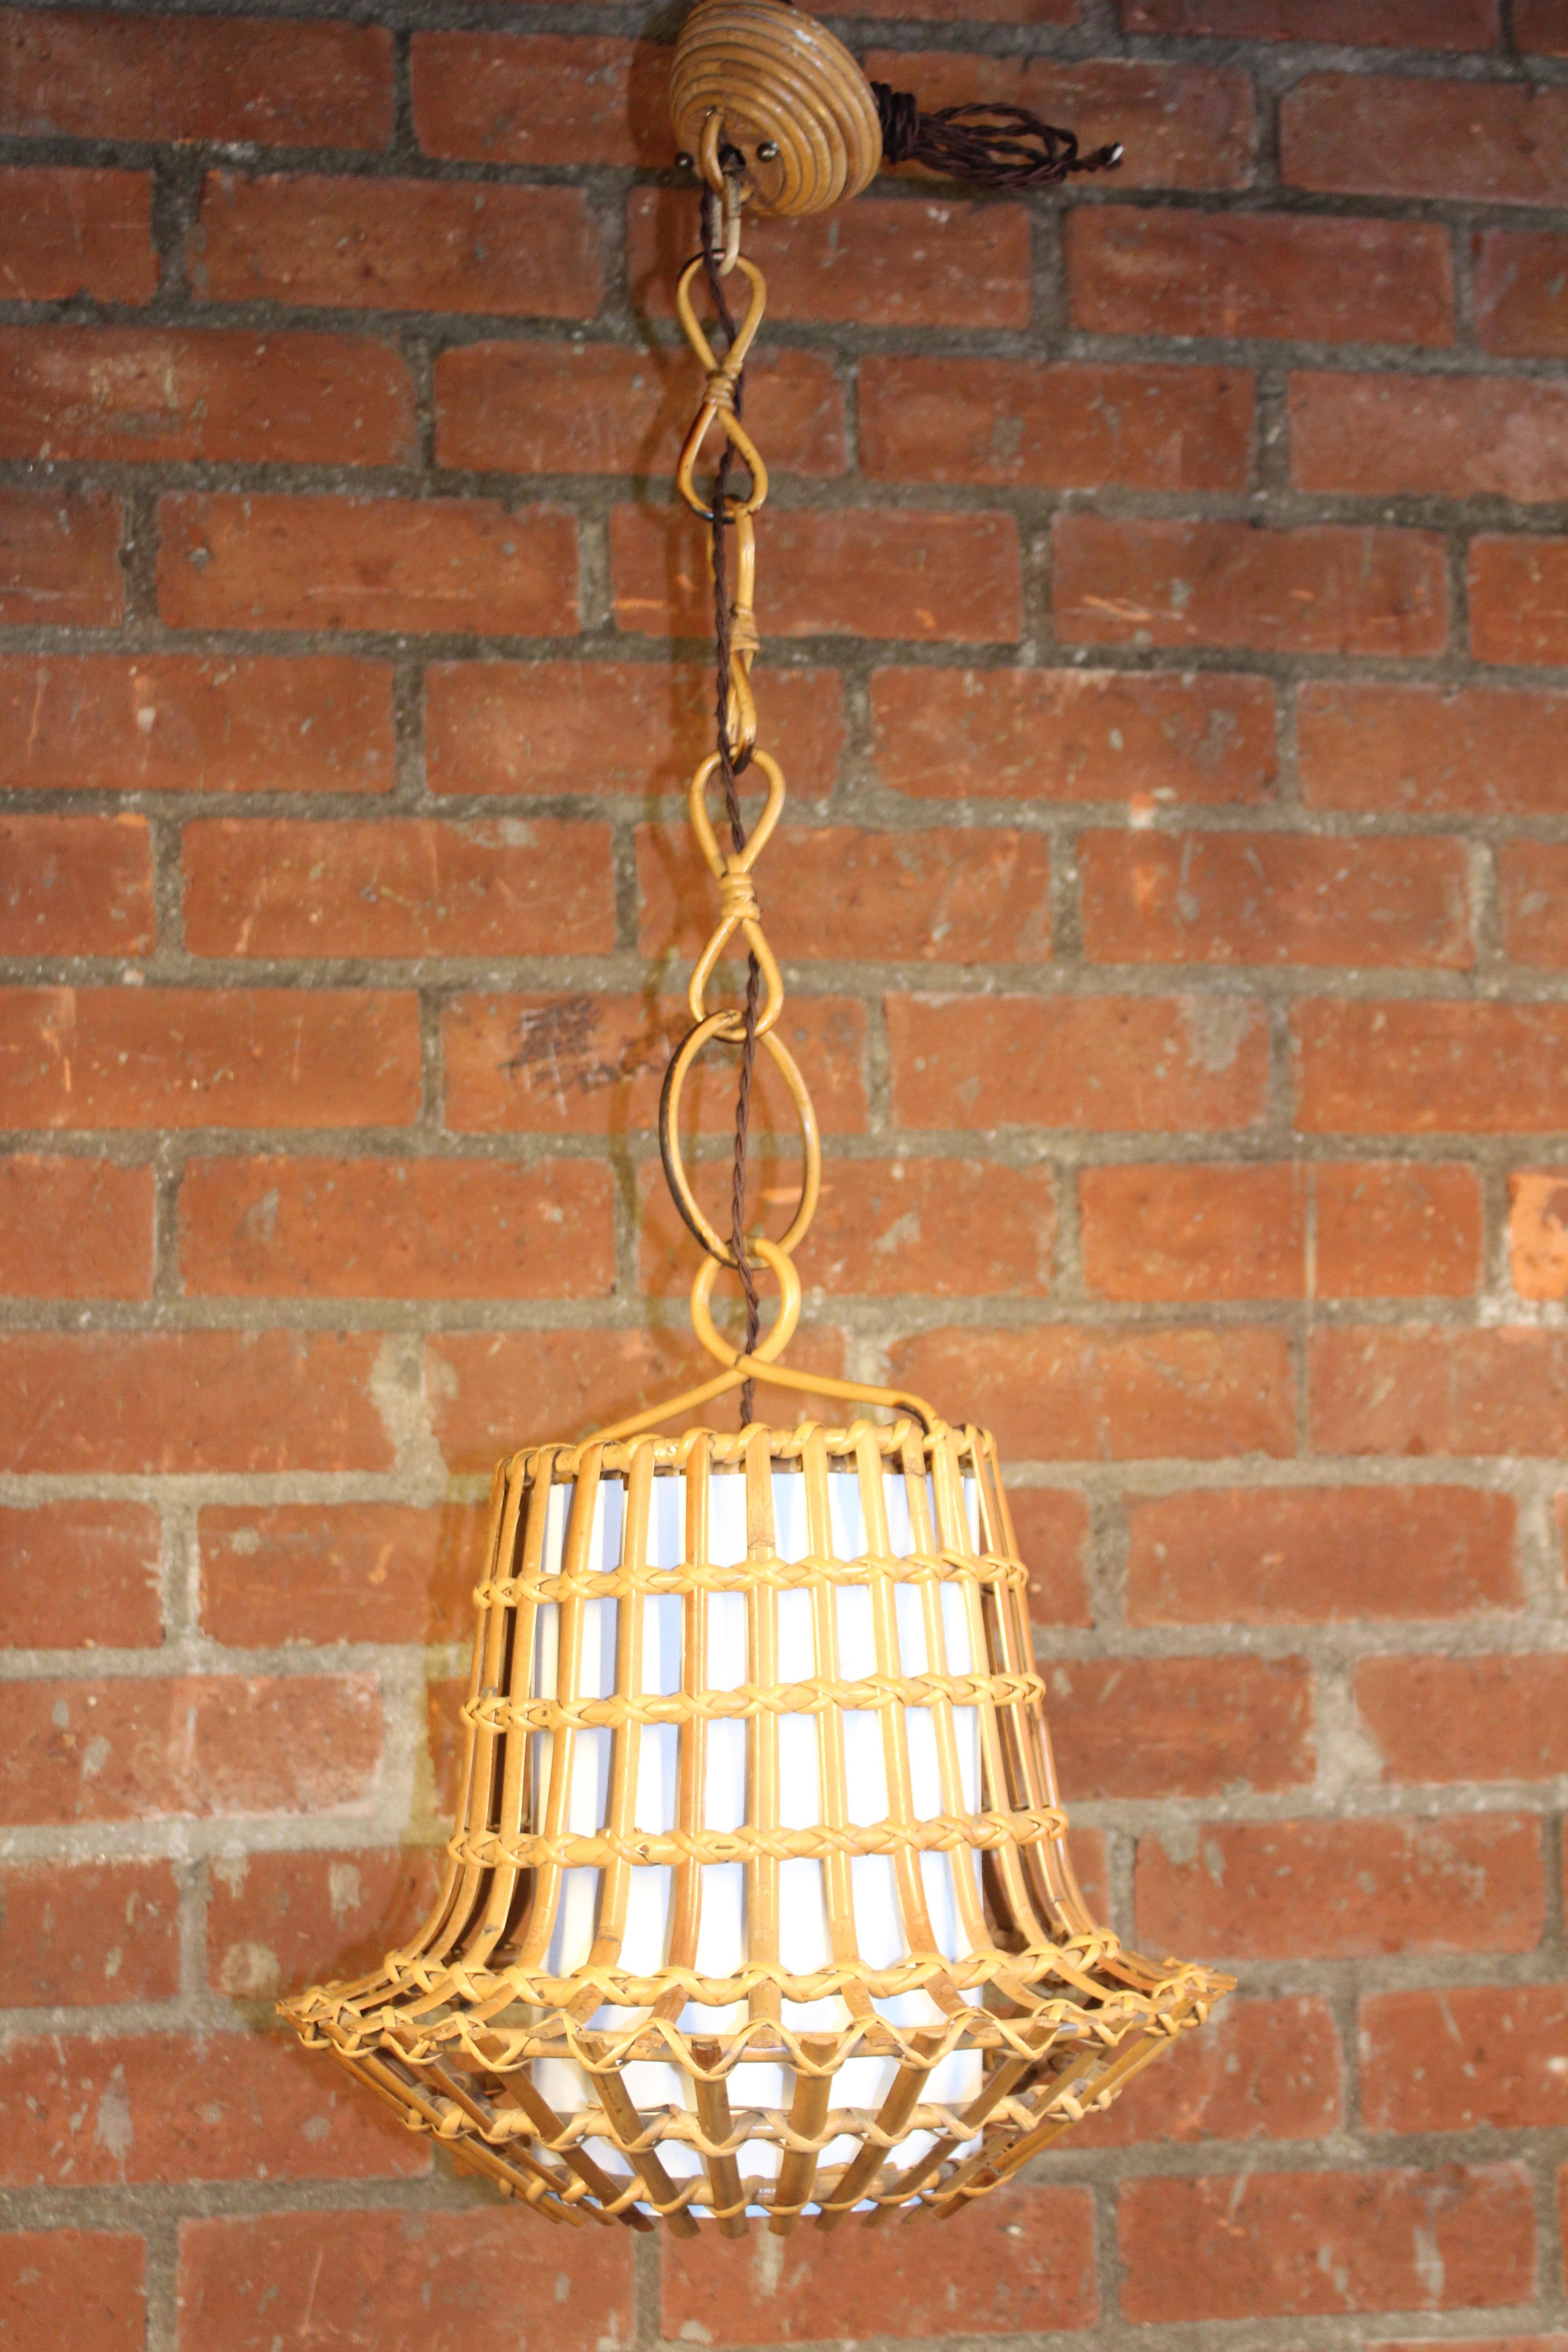 A vintage bamboo and rattan hanging pendant light fixture from Italy, 1960s. Newly rewired and fitted with a new white linen insert. Original bamboo chain and canopy. In overall wonderful condition and ready to be installed in your home. 18